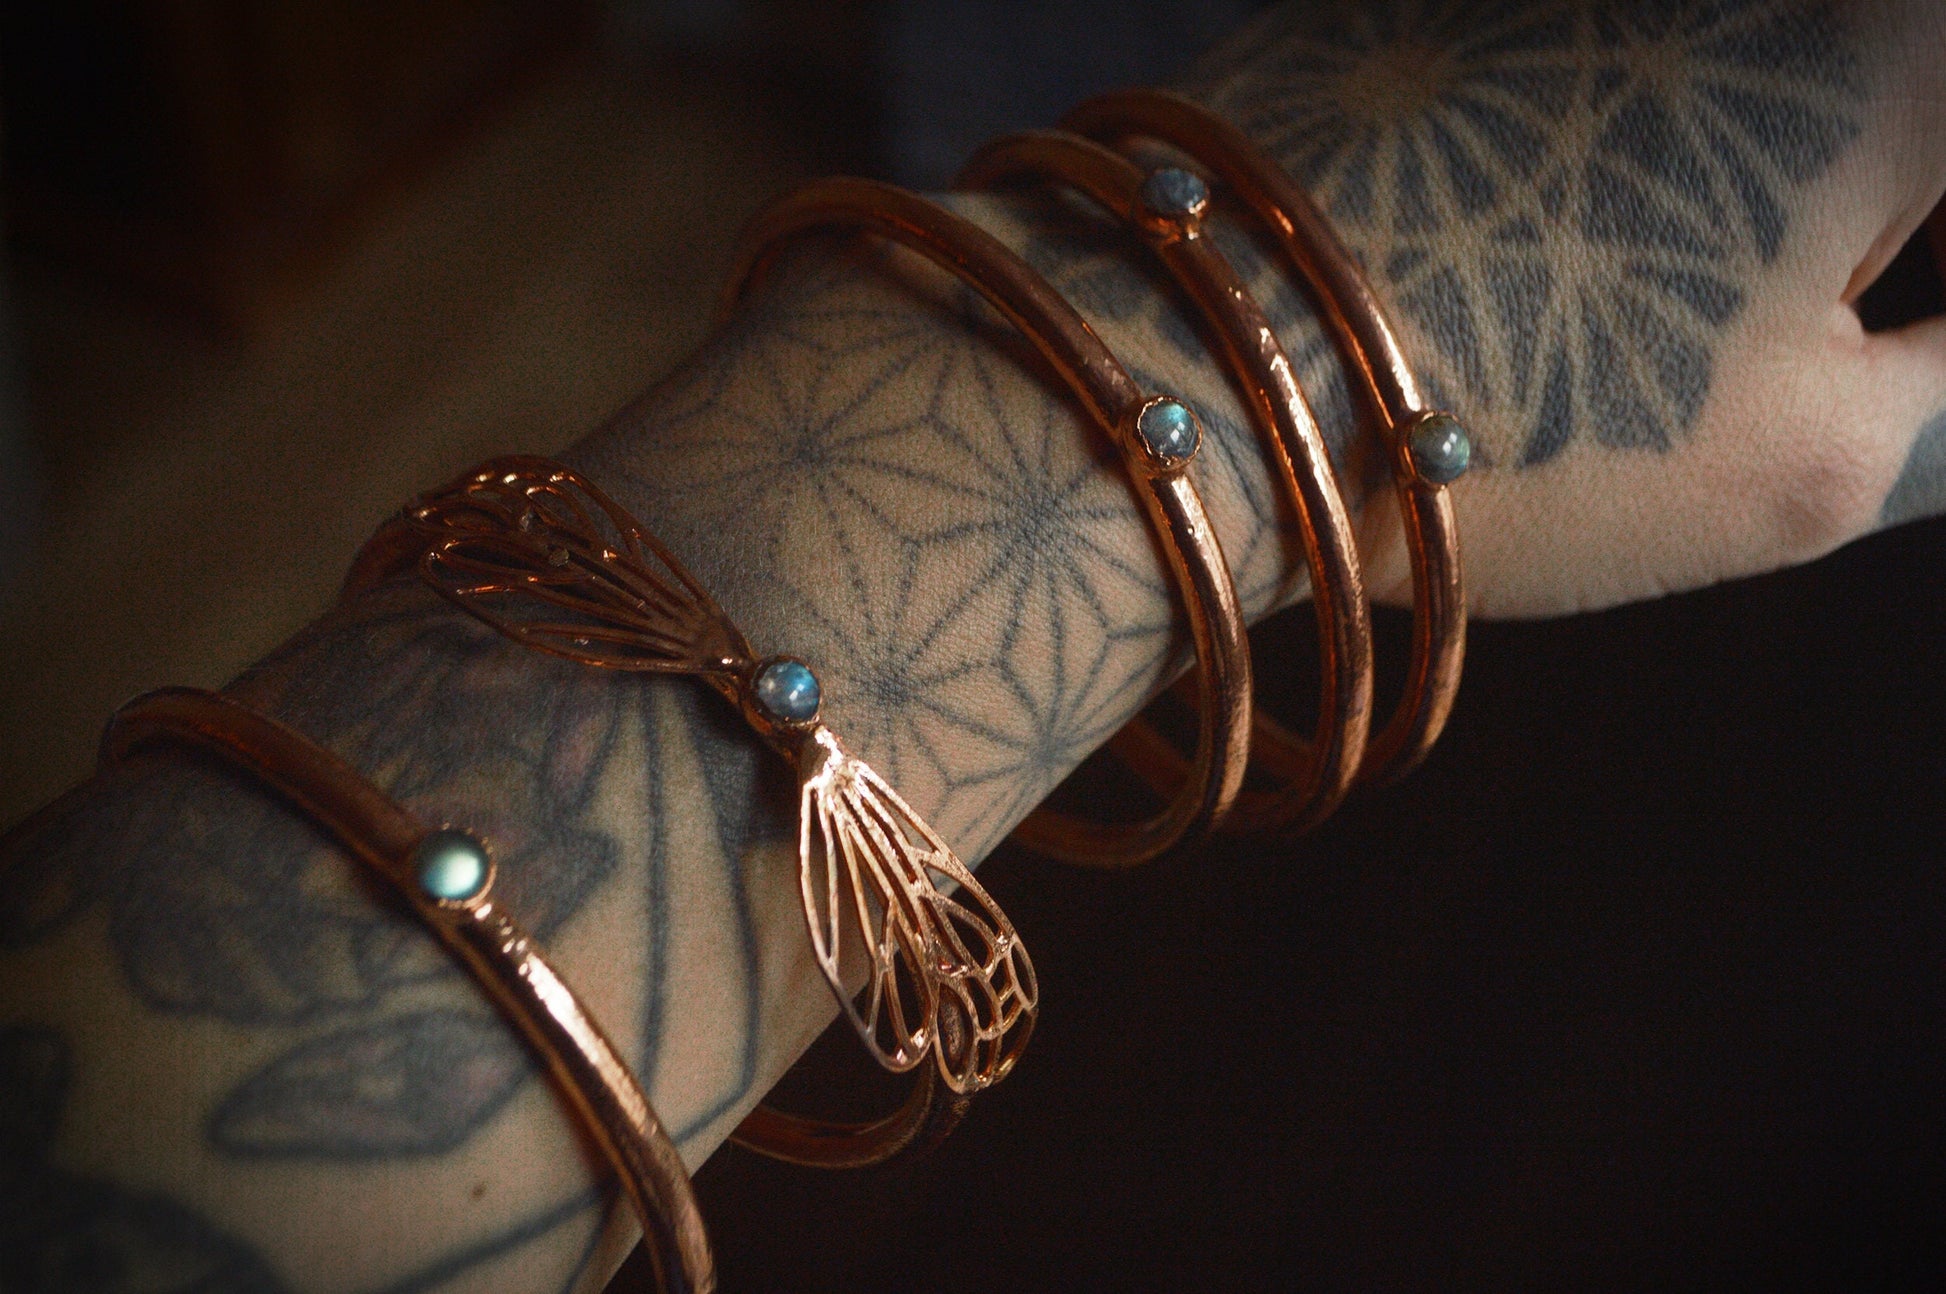 Copper and labradorite stackable bangles, fairy jewellery